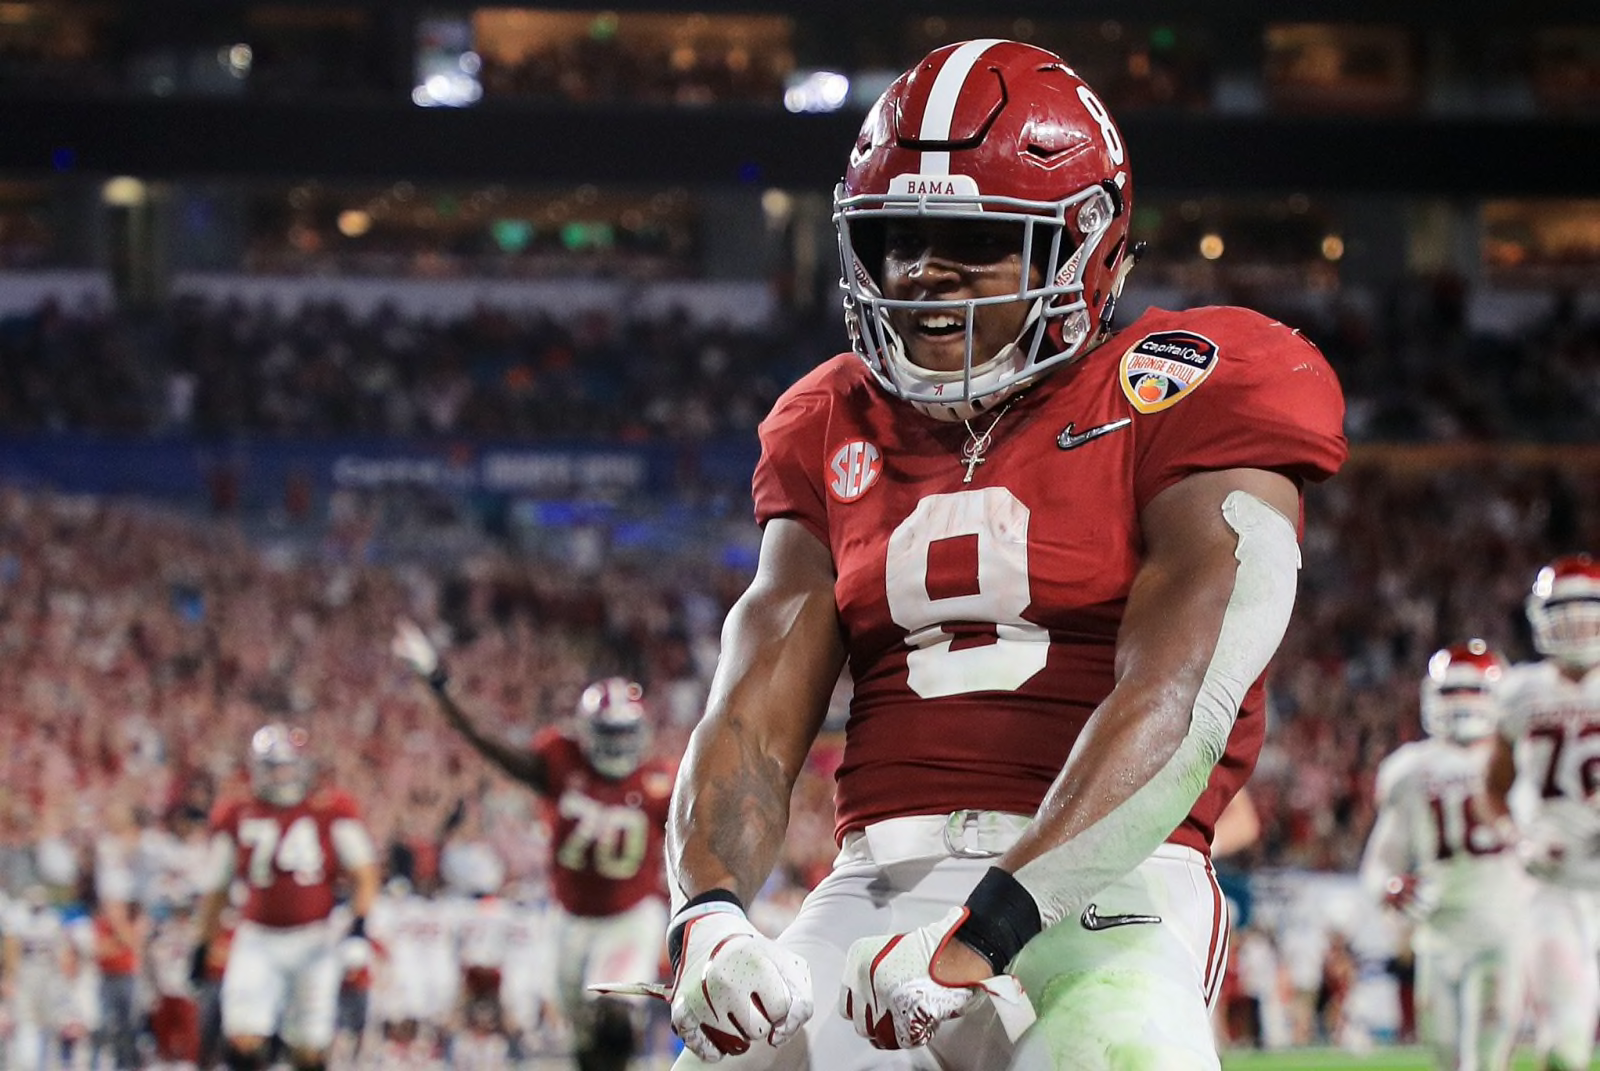 Alabama RB Josh Jacobs is the No. 1 RB in the 2019 NFL Draft, NFL Draft